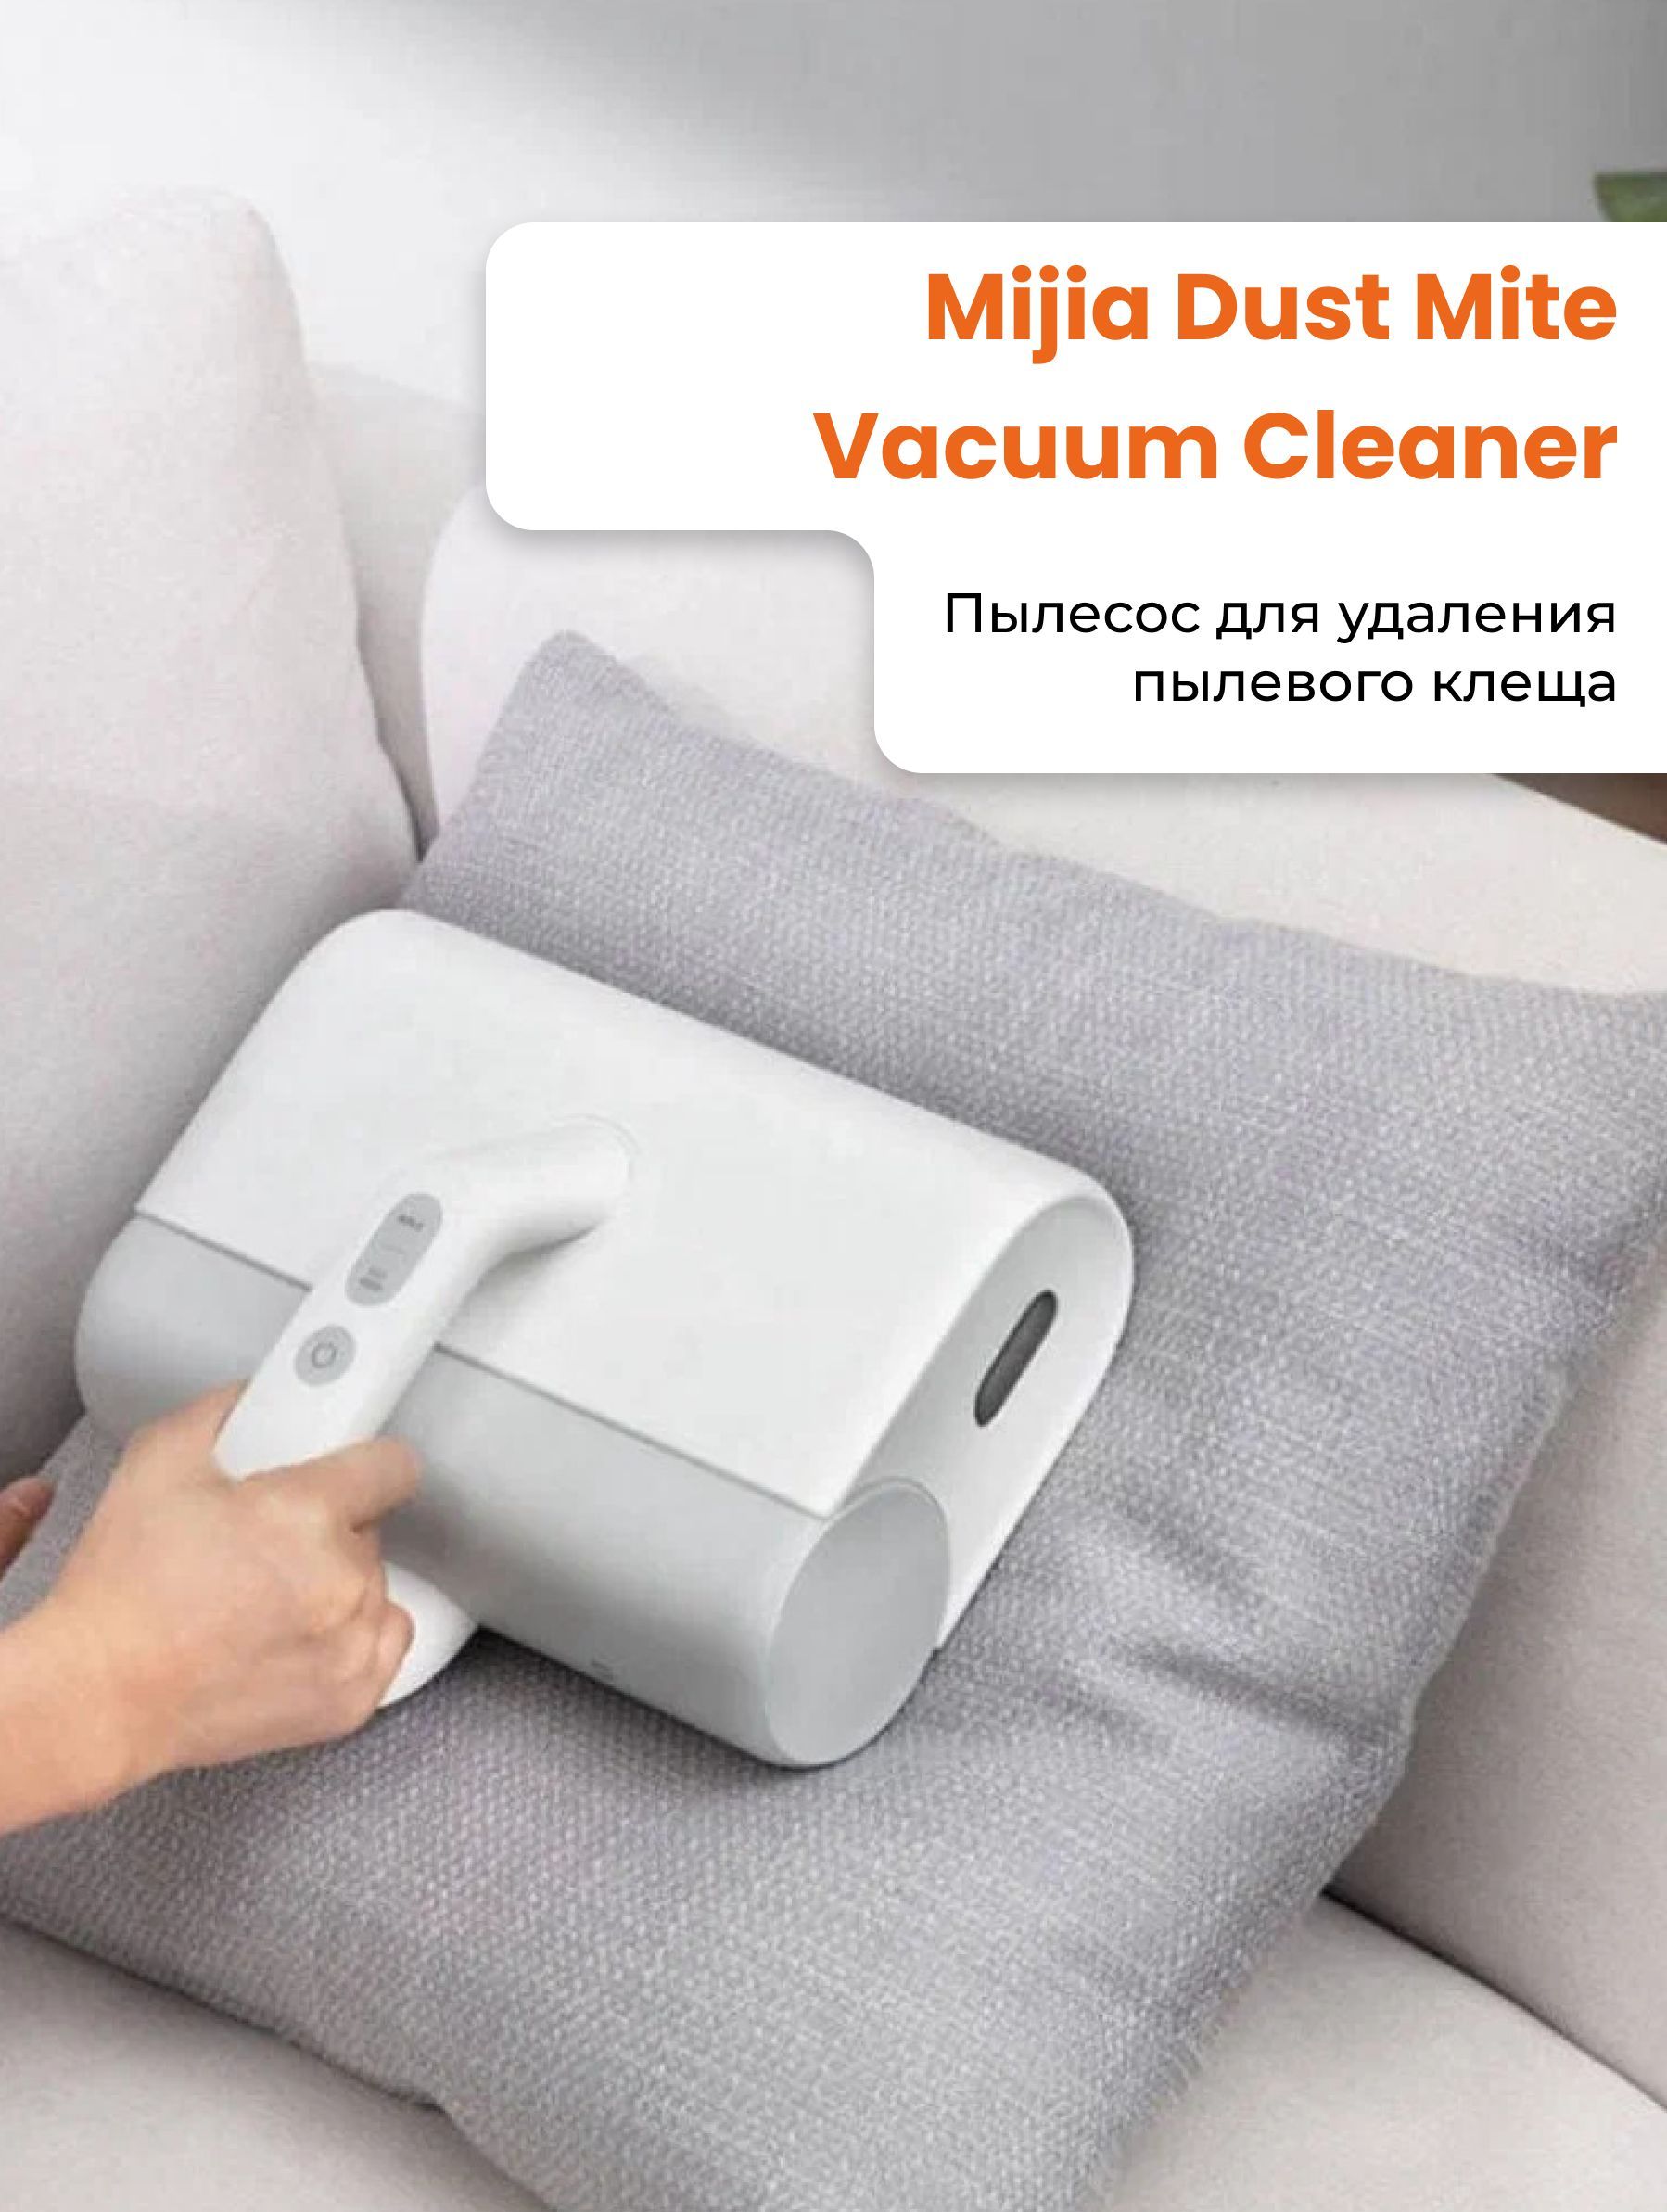 Xiaomi vacuum cleaner mjcmy01dy. Xiaomi mjcmy01dy. Пылесос Xiaomi (mjcmy01dy). Xiaomi Dust Mite Vacuum. Xiaomi Mijia Dust Mite Vacuum Cleaner.